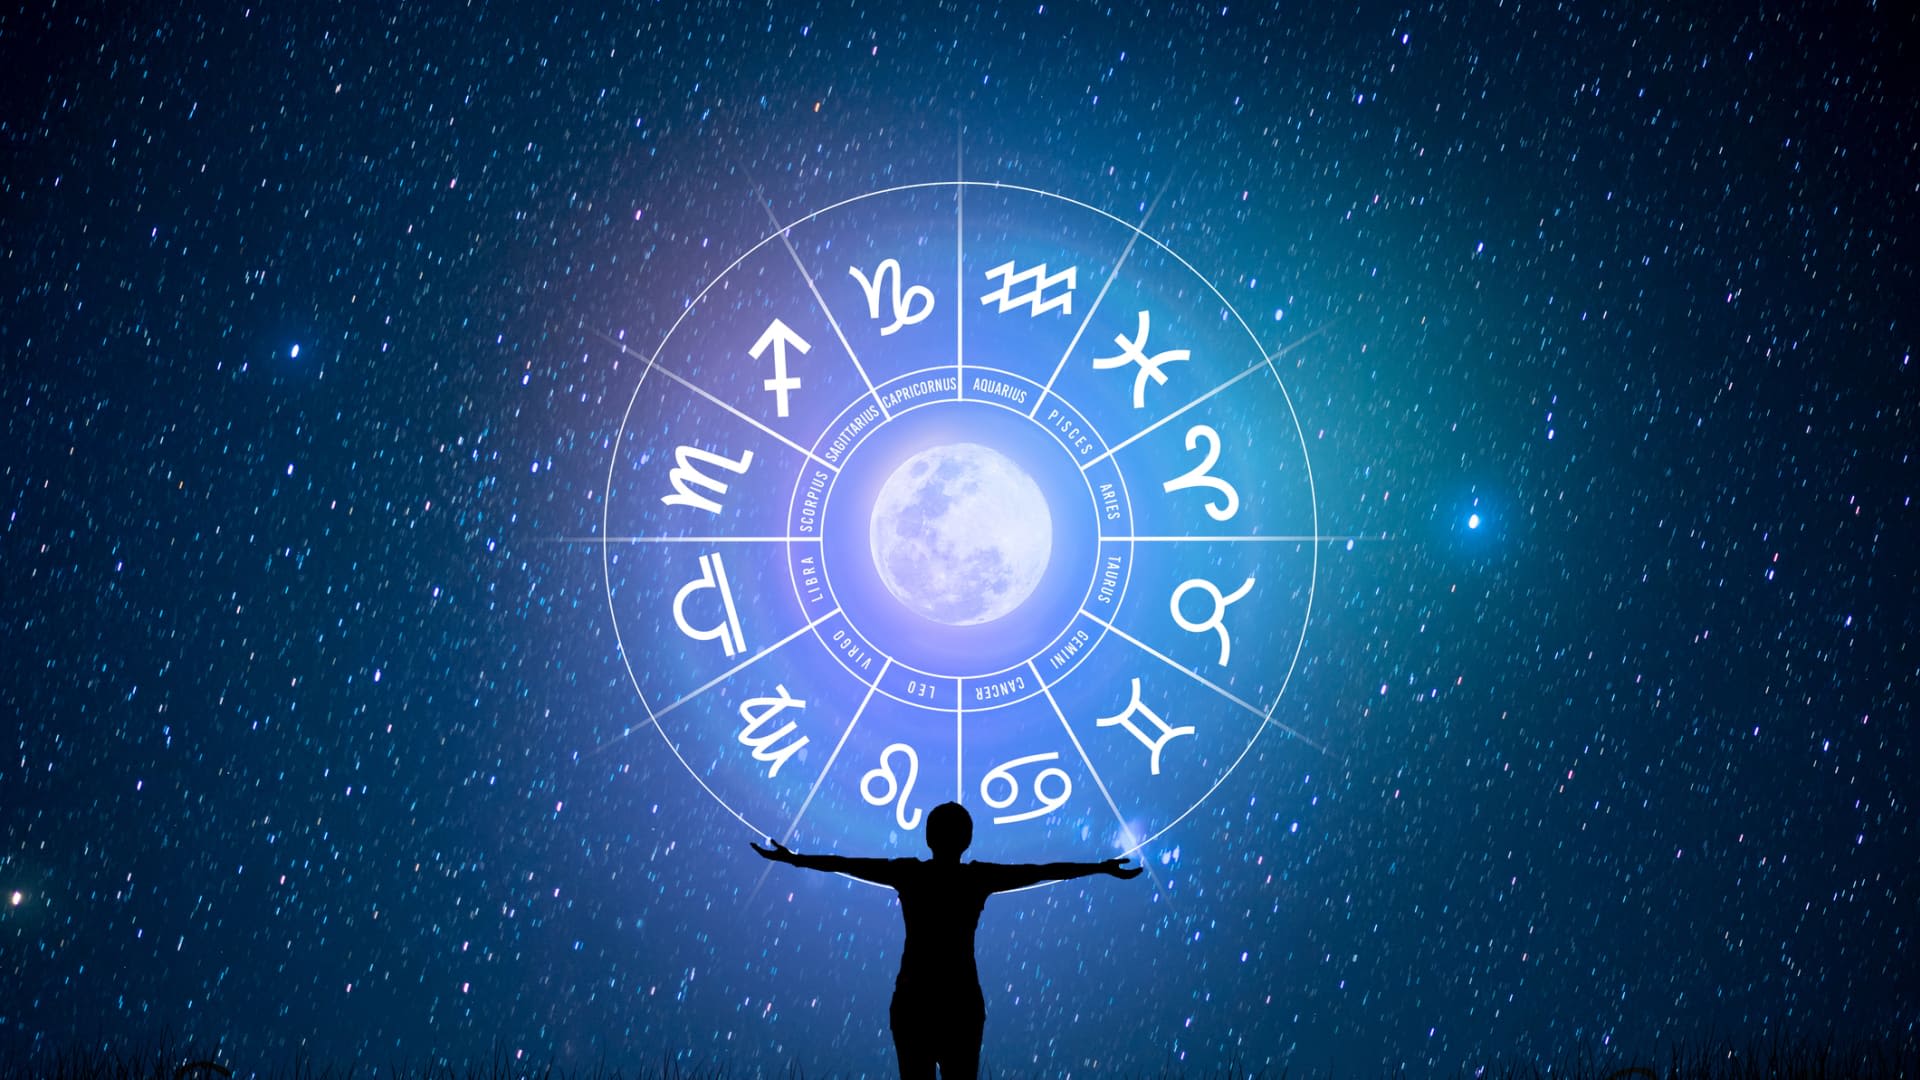 As Gen Zers opt for astrology to pick stocks, experts warn it's 'neither optimal nor ideal'